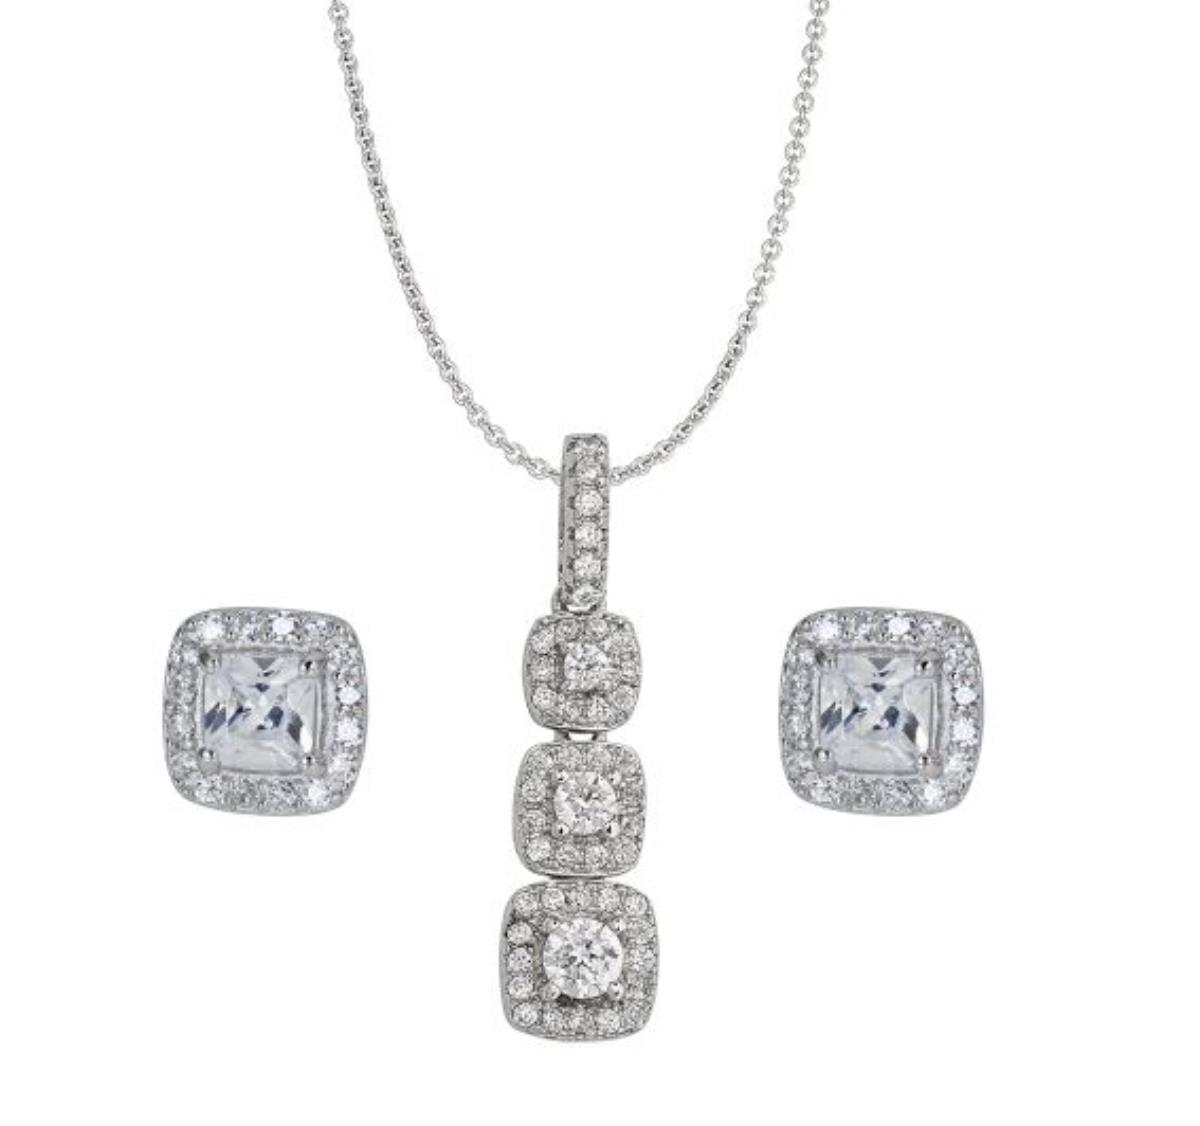 Sterling Silver Rhodium Sq Halo Petite Pave Stud & 3-Stone Pave Sq Halo 18" Necklace Set